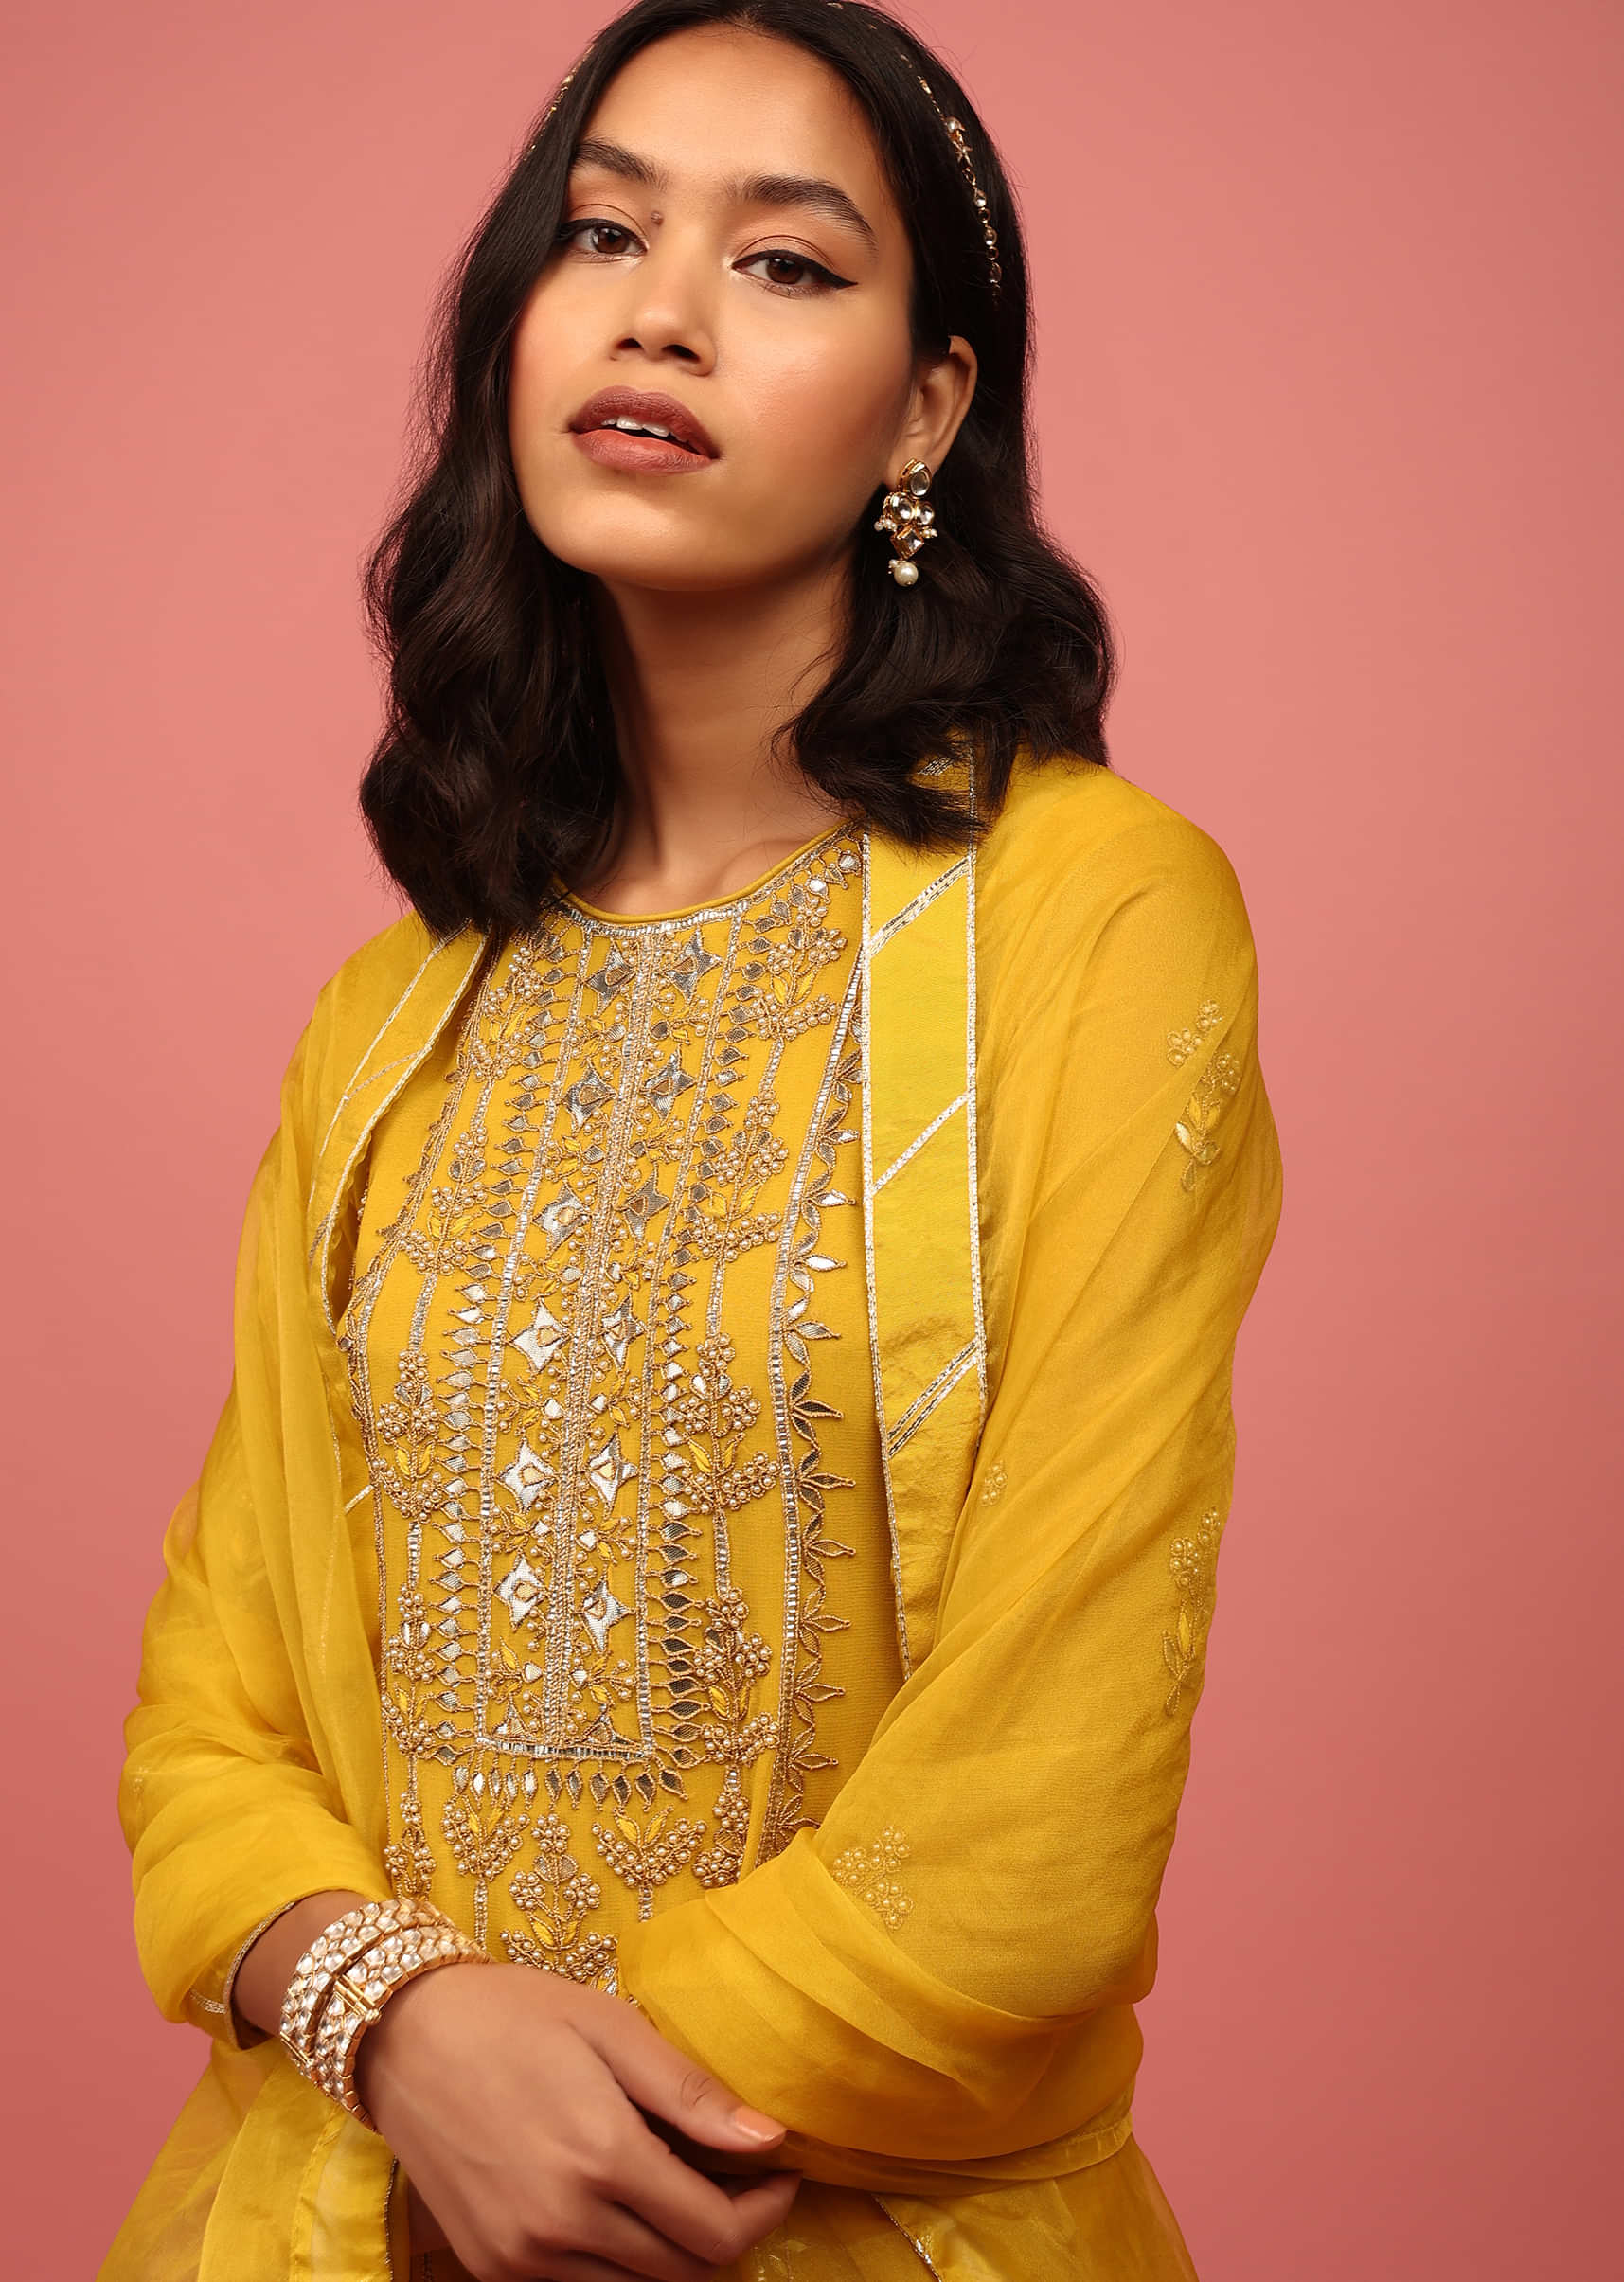 Cyber Yellow Straight Palazzo Suit Fully-Hand Embellished In Georgette With An Organza Dupatta